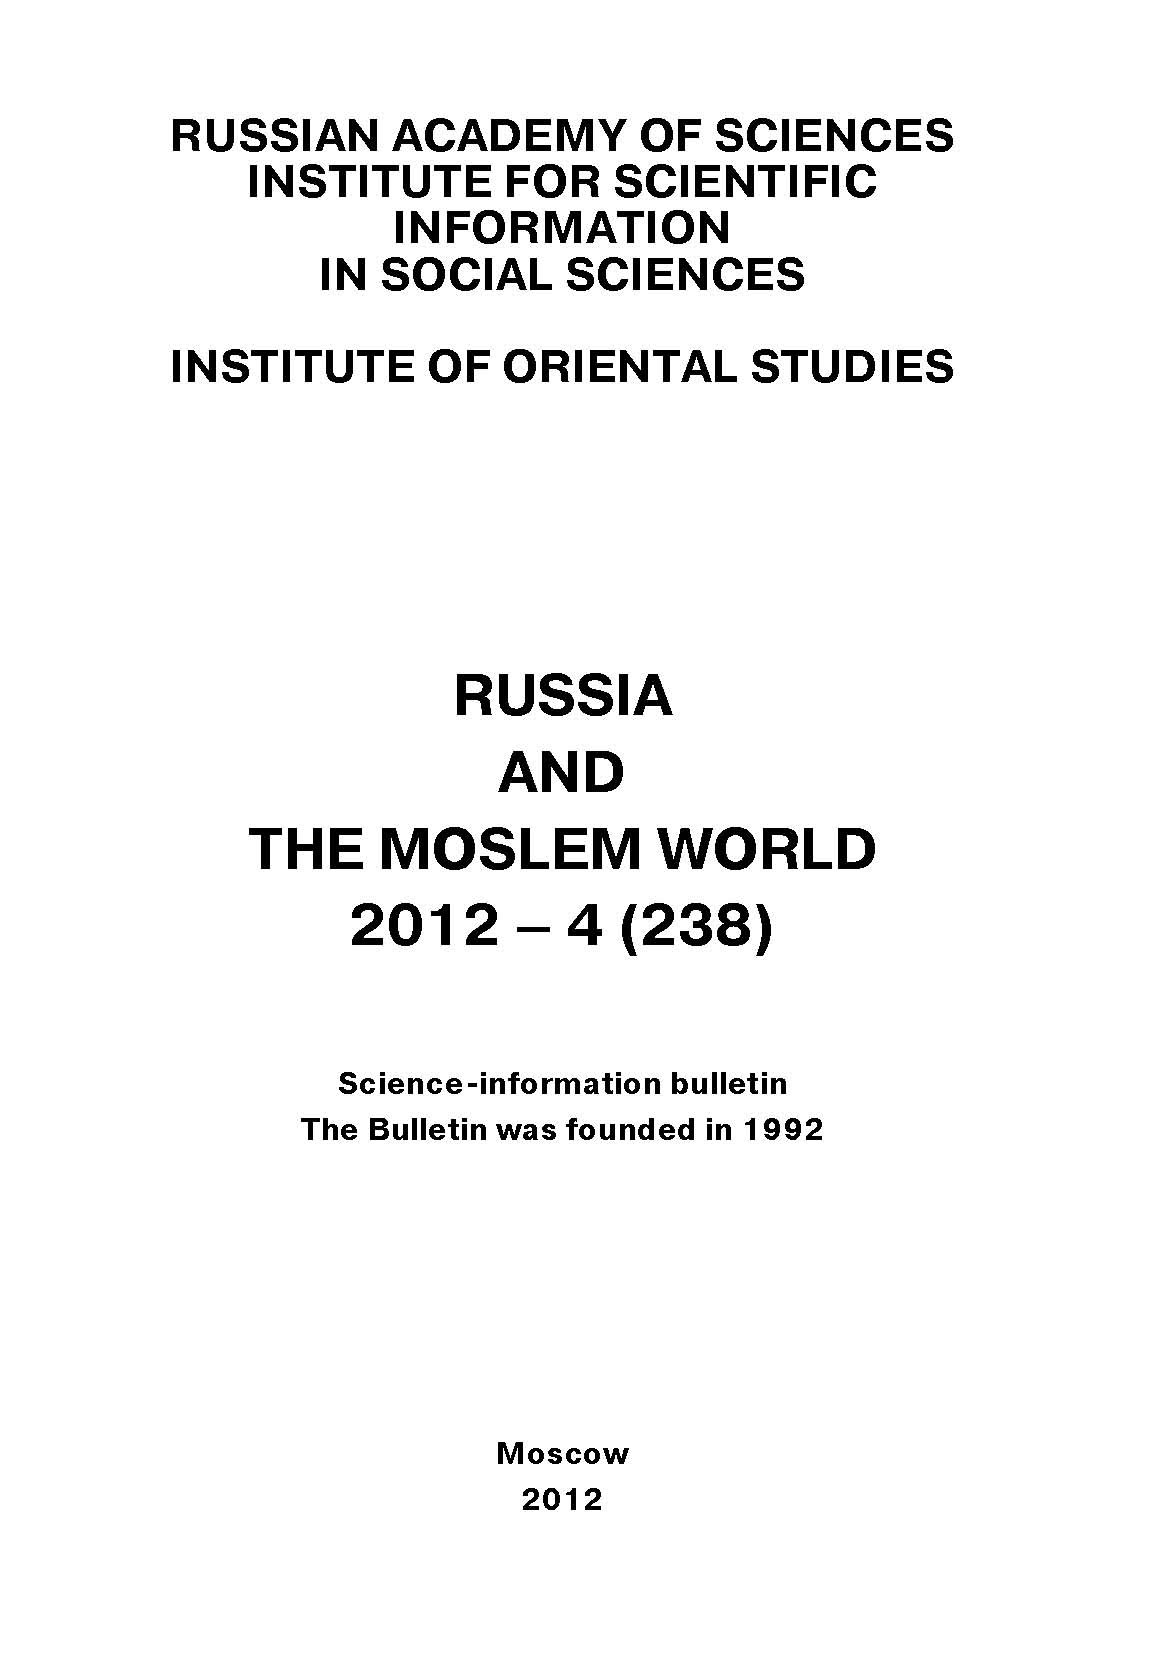 Russia and the Moslem World№ 04 / 2012